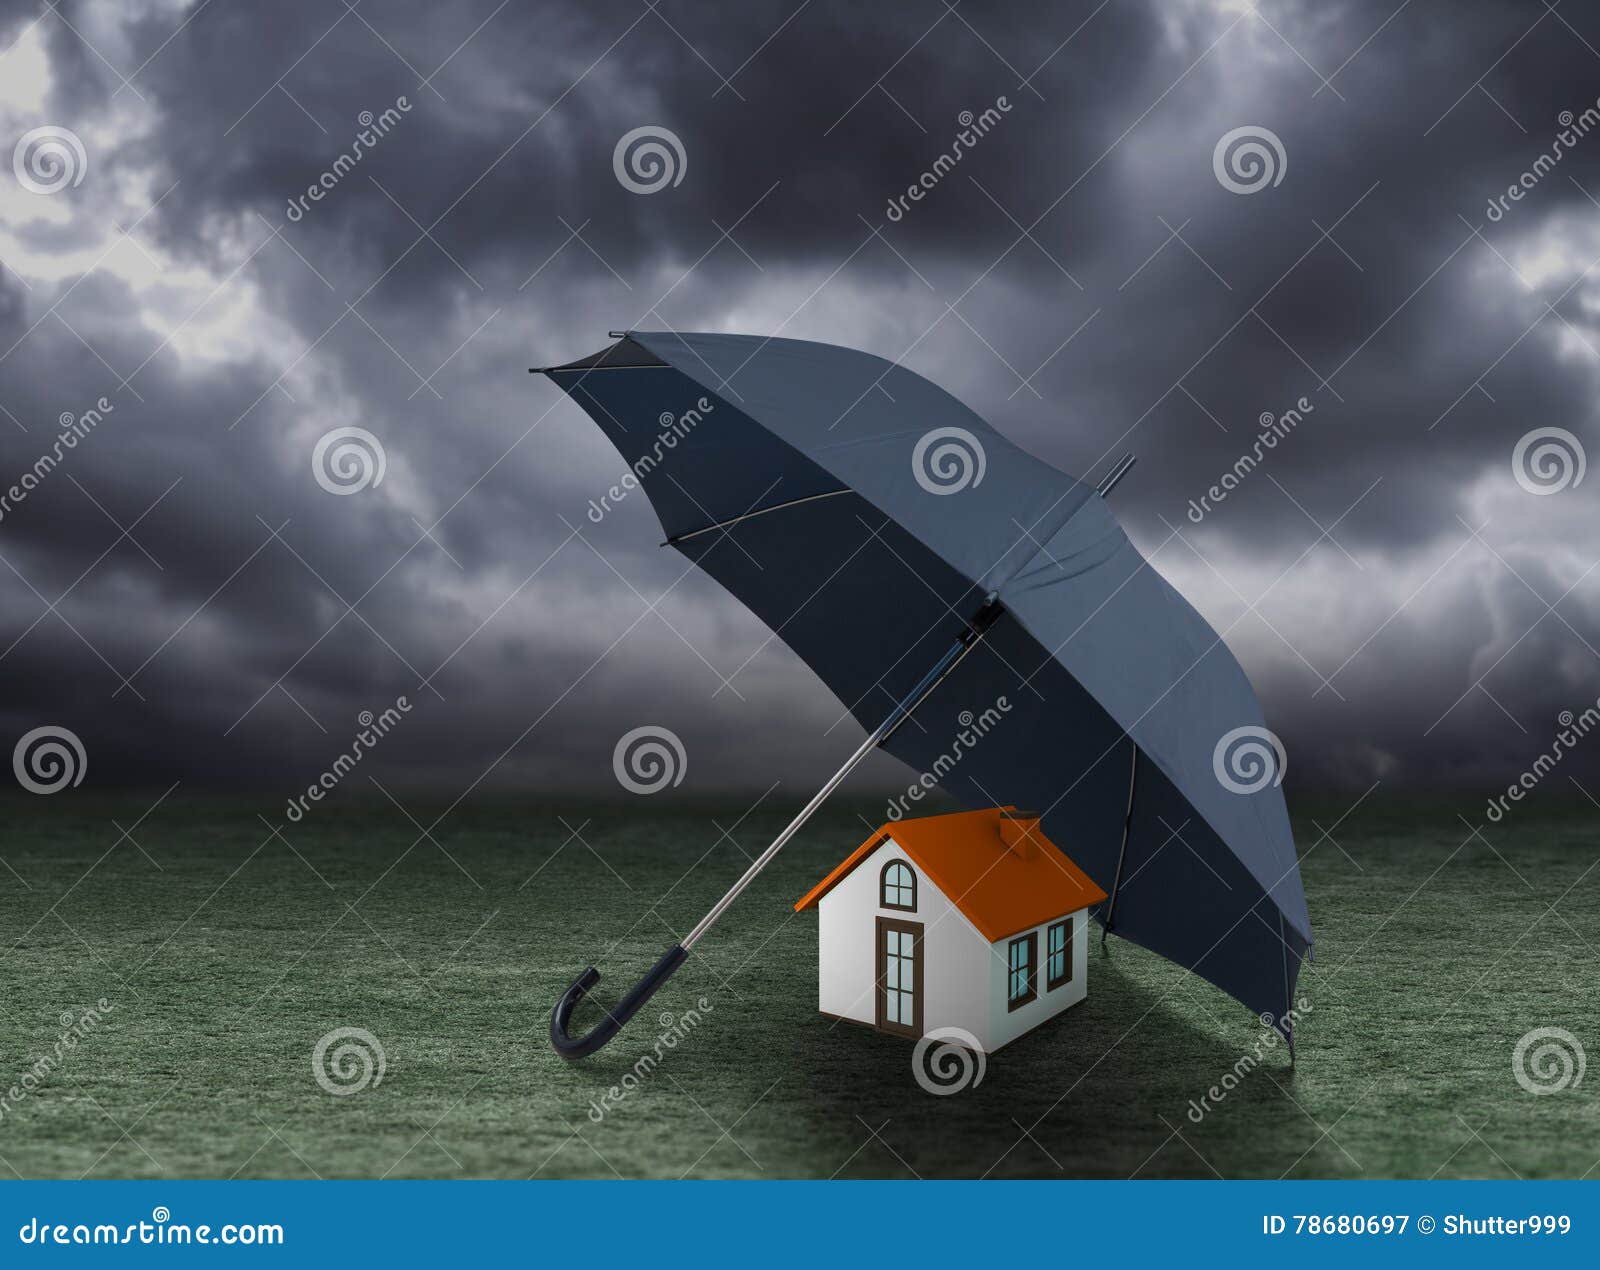 house insurance concept, house protected under umbrella